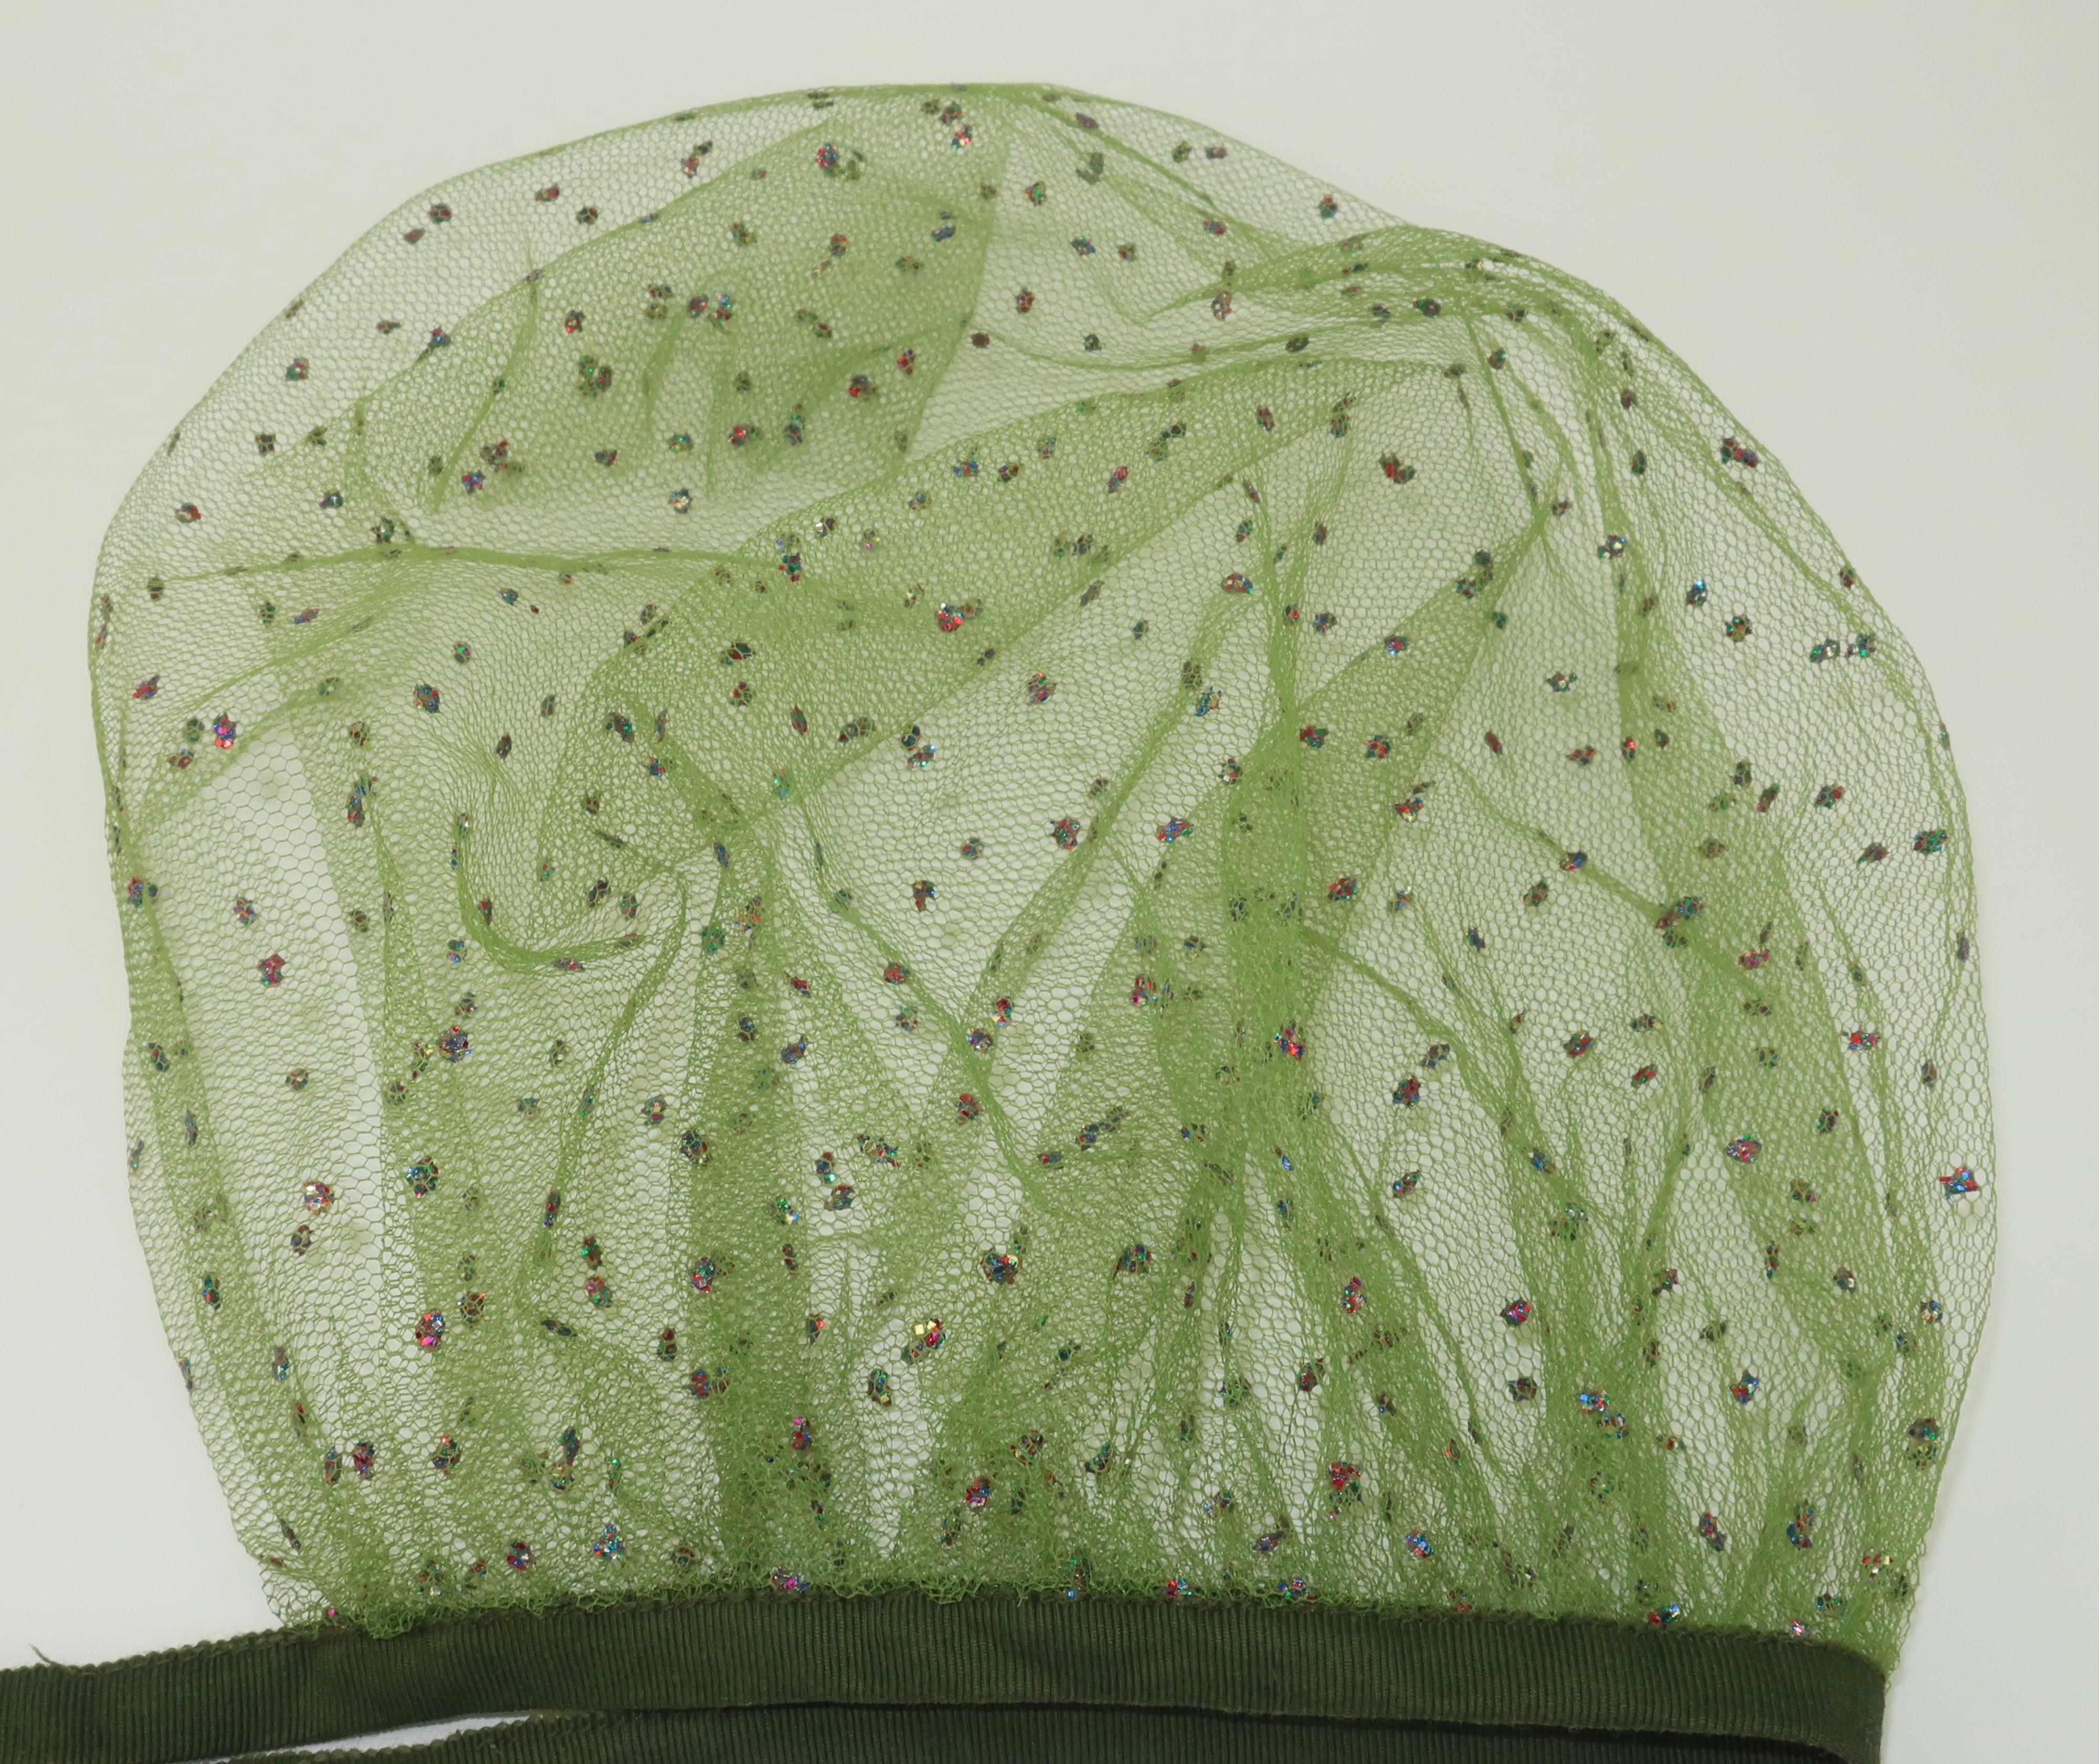 Green Net Head Scarf With Multi Color Glitter, 1950's 3